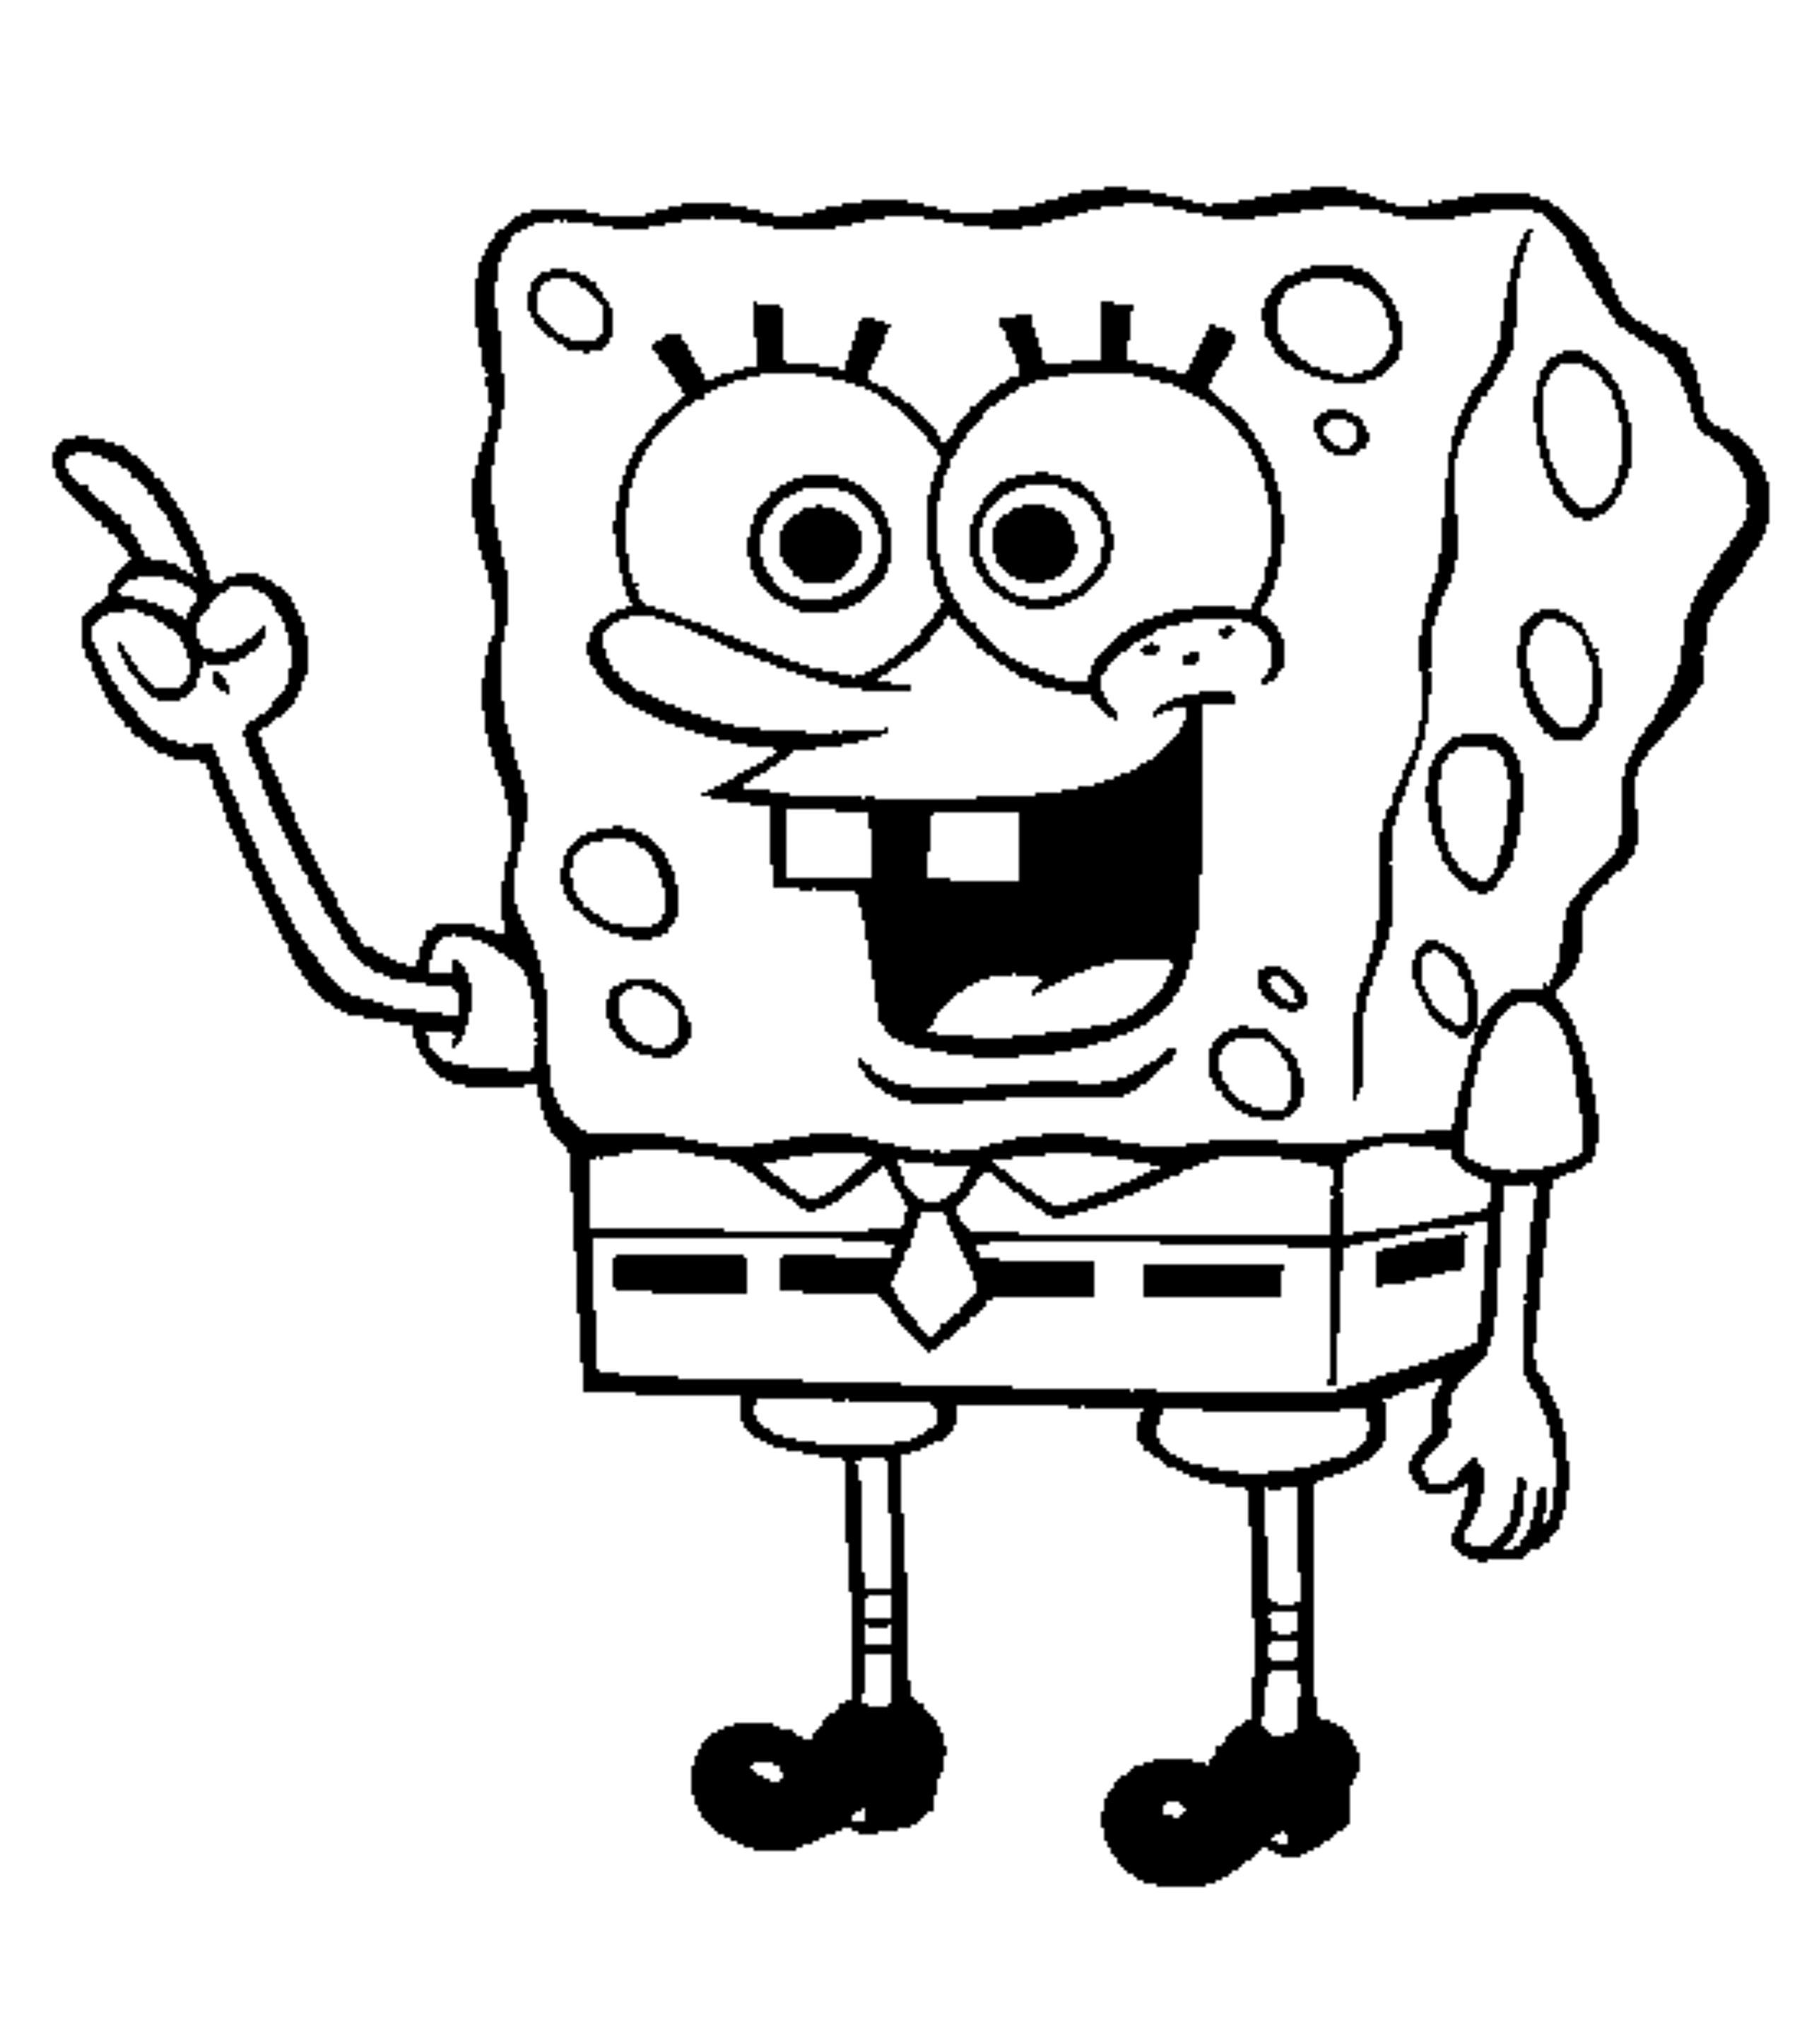 Best Spongebob Coloring Pages - Coloring Pages For All Ages